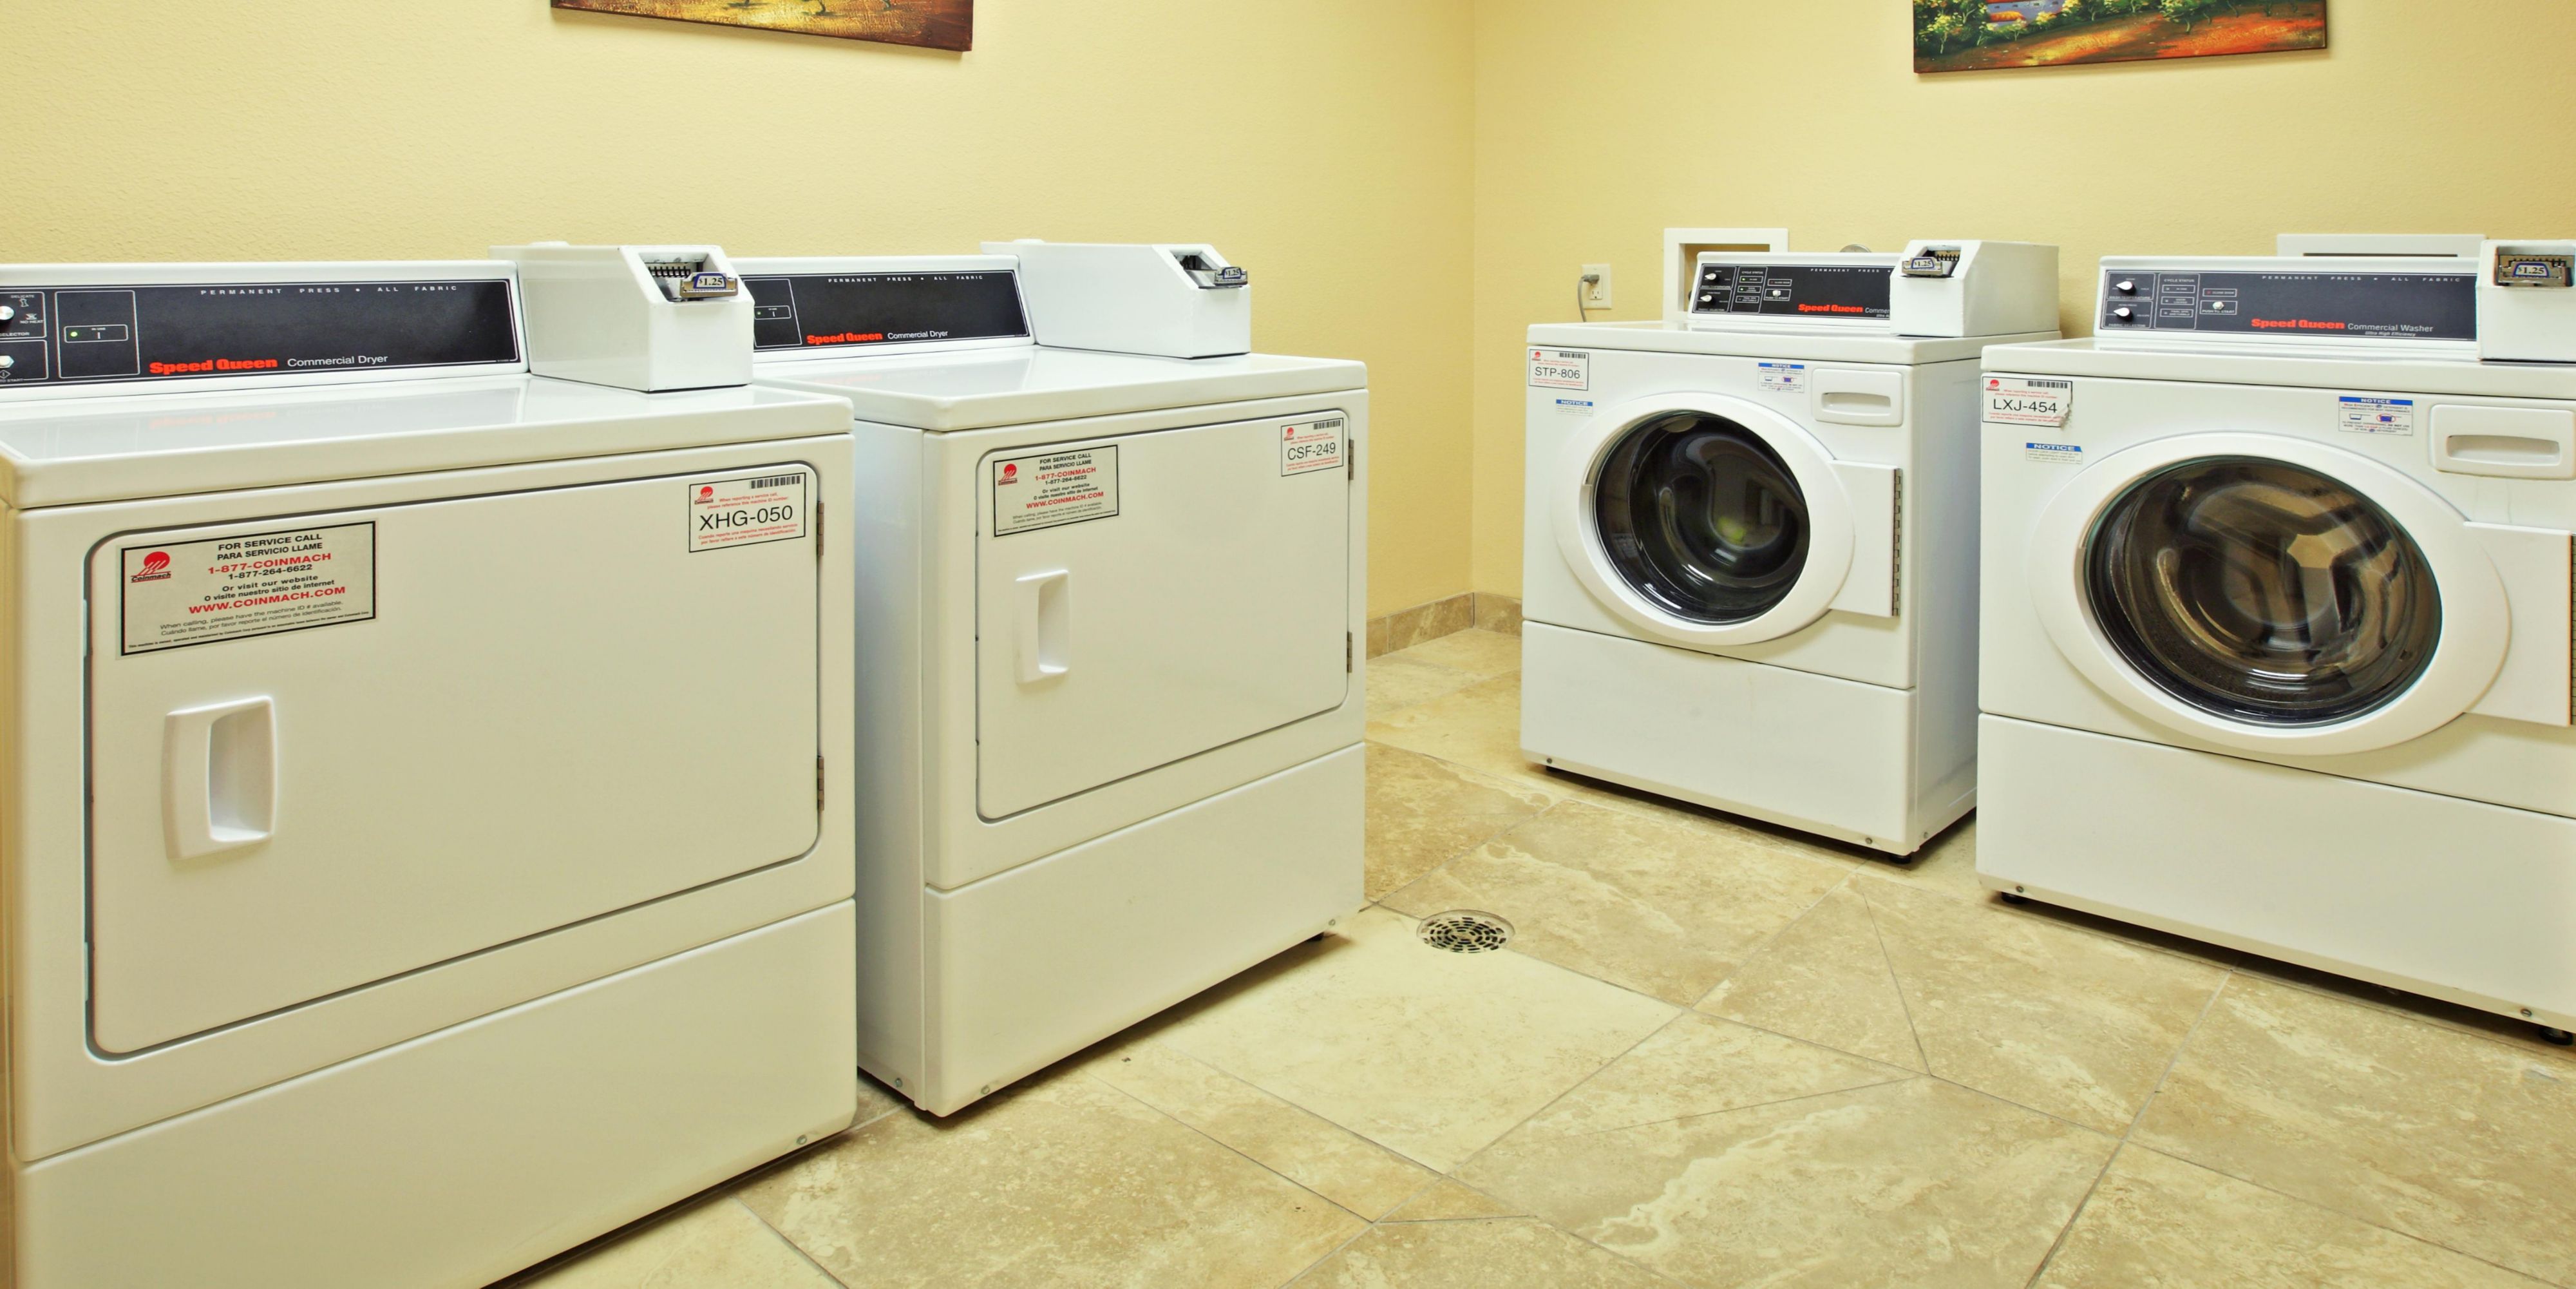 The Holiday Inn Express and Suites Marshall offers self-service, coin operated, guest laundry.